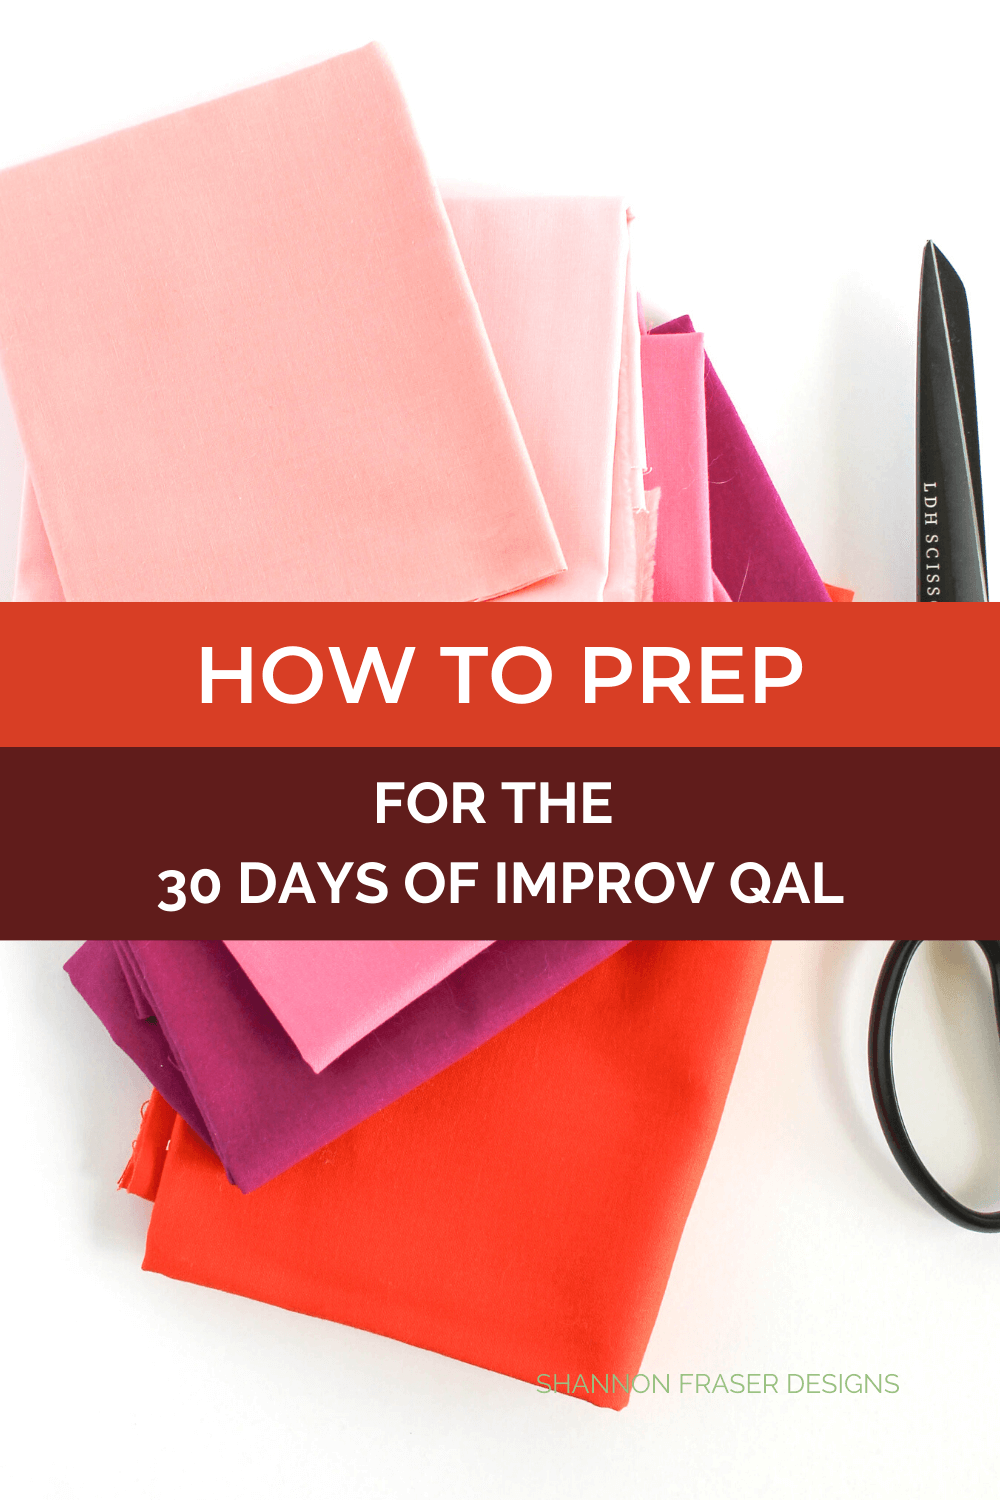 We're back for the 3rd annual 30 Days of Improv QAL and today I'm sharing some top tips on how to get ready (including step-by-step guide on how to post on Instagram). See it on the blog #30daysofimprovqal #quiltalong